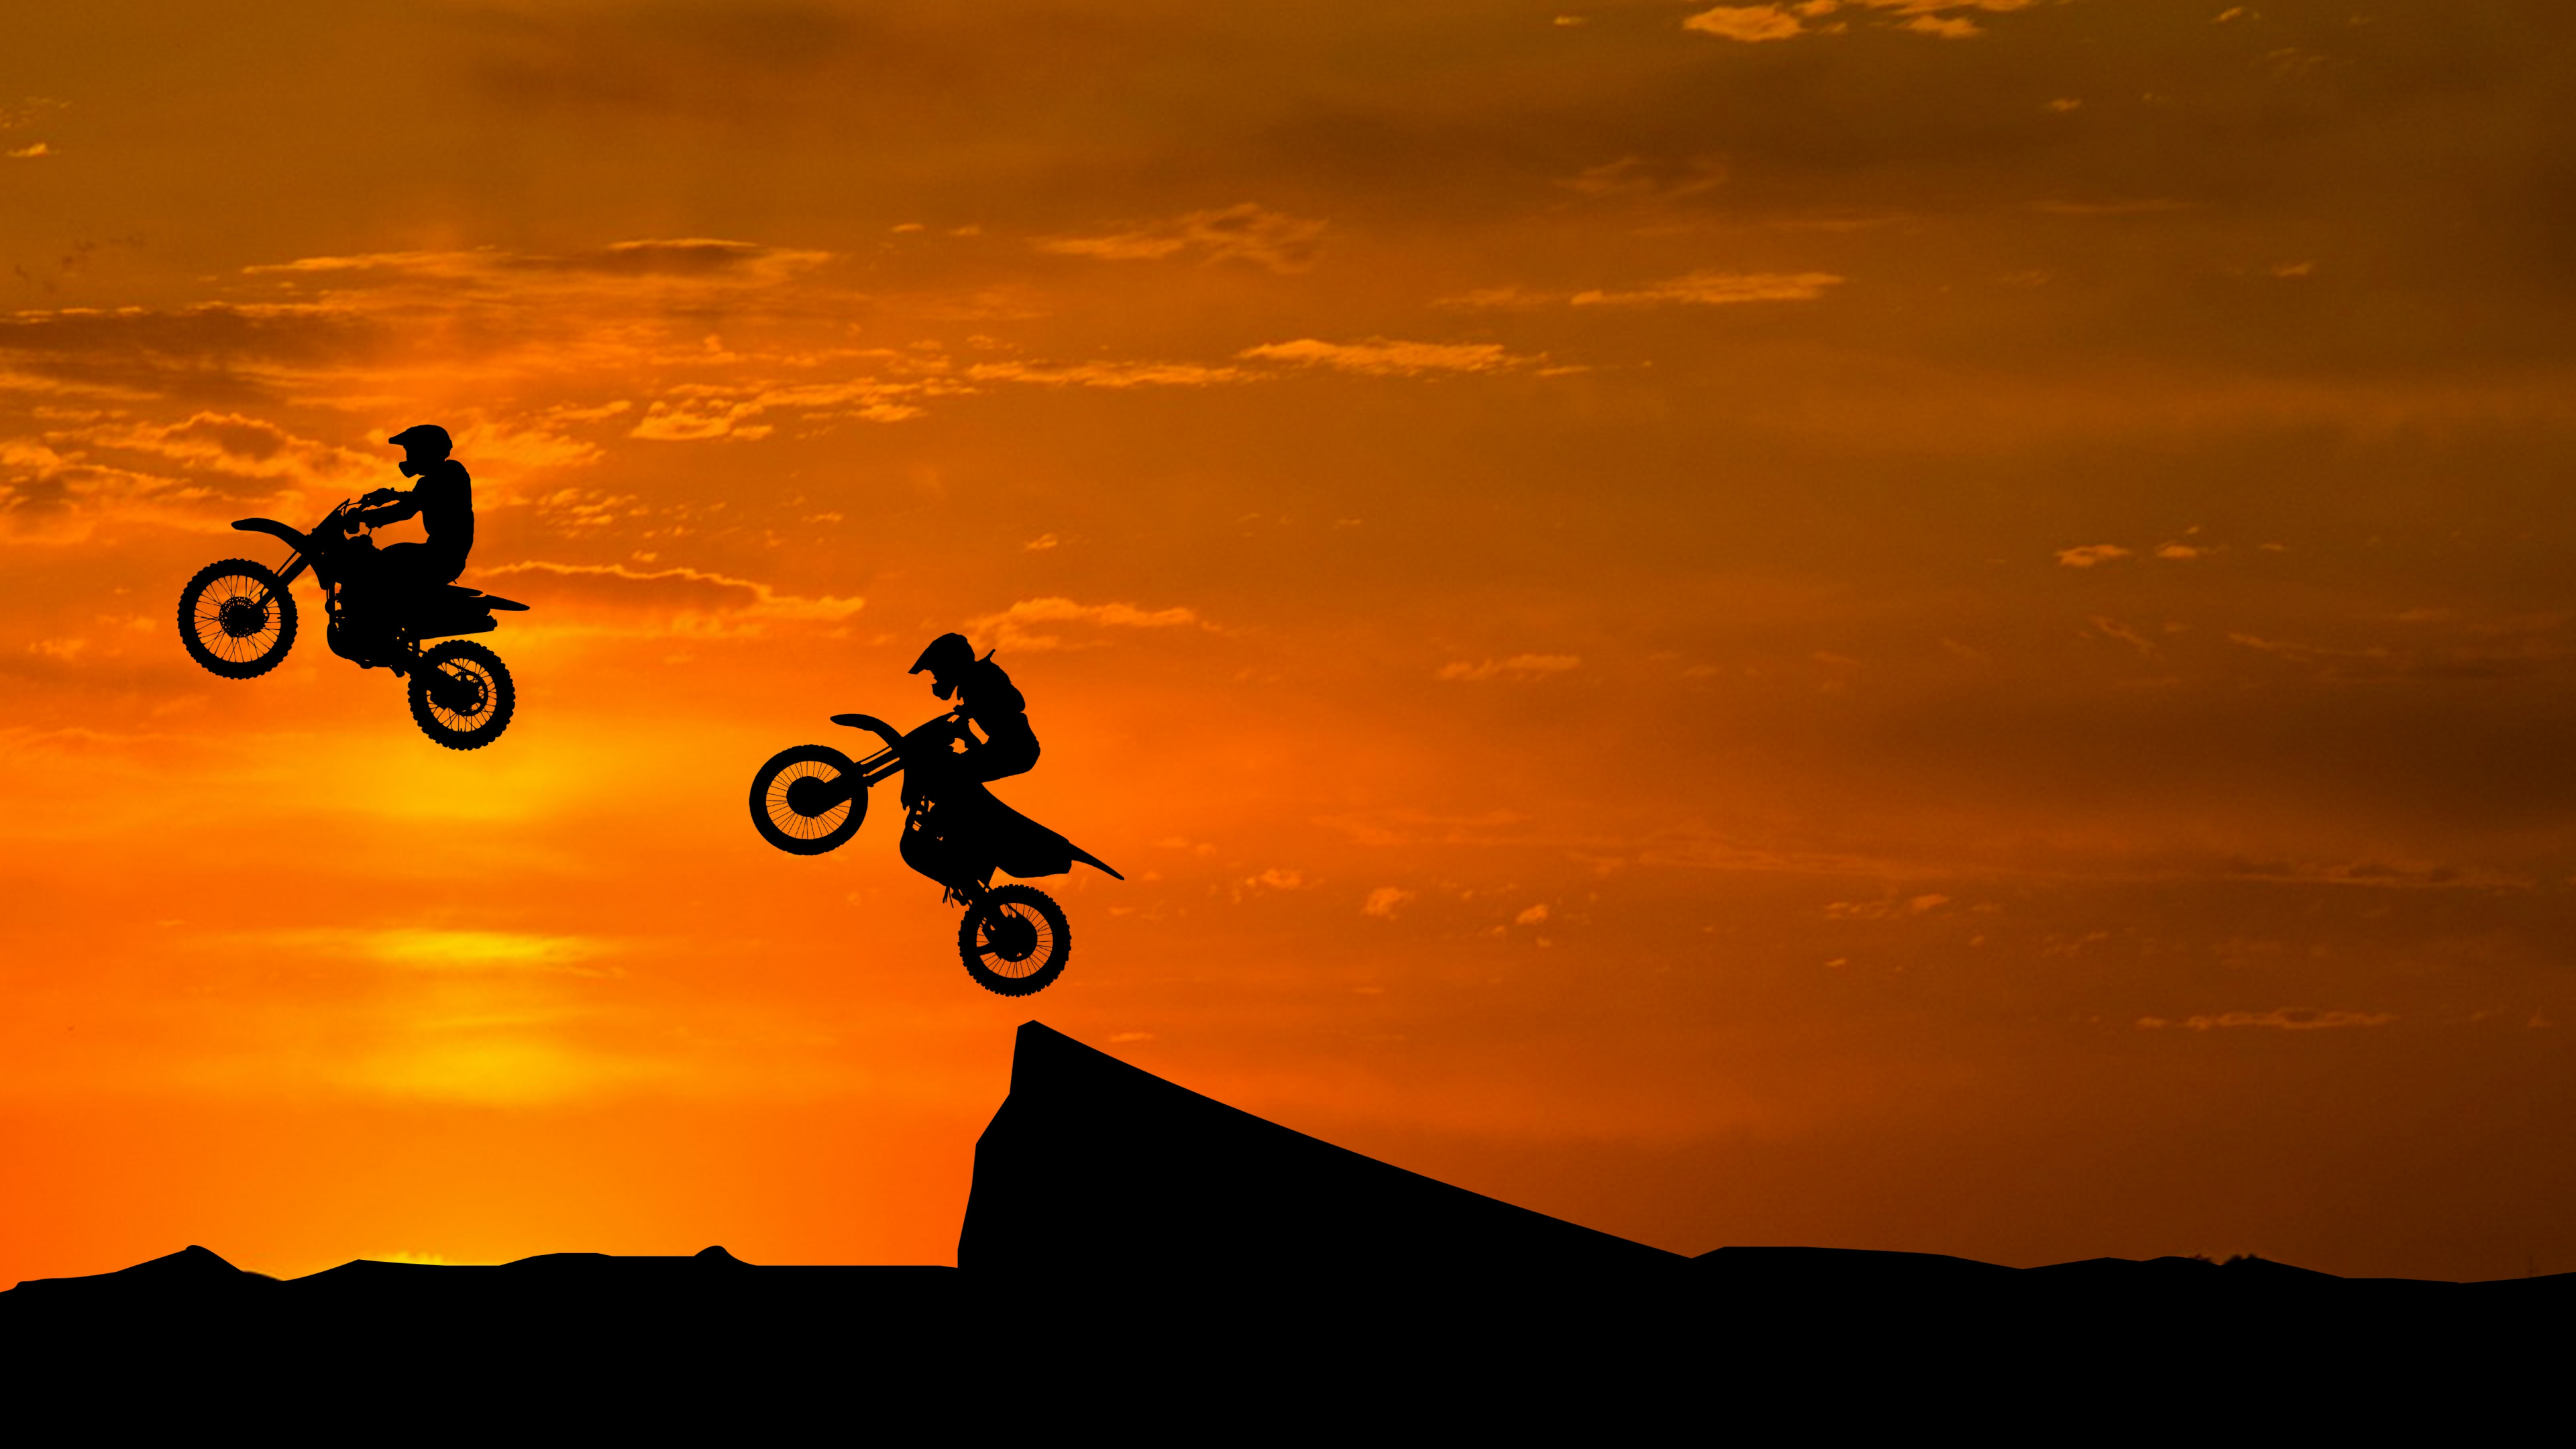 Silhouette of Man Riding Bicycle on Mountain During Sunset. Wallpaper in 3840x2160 Resolution